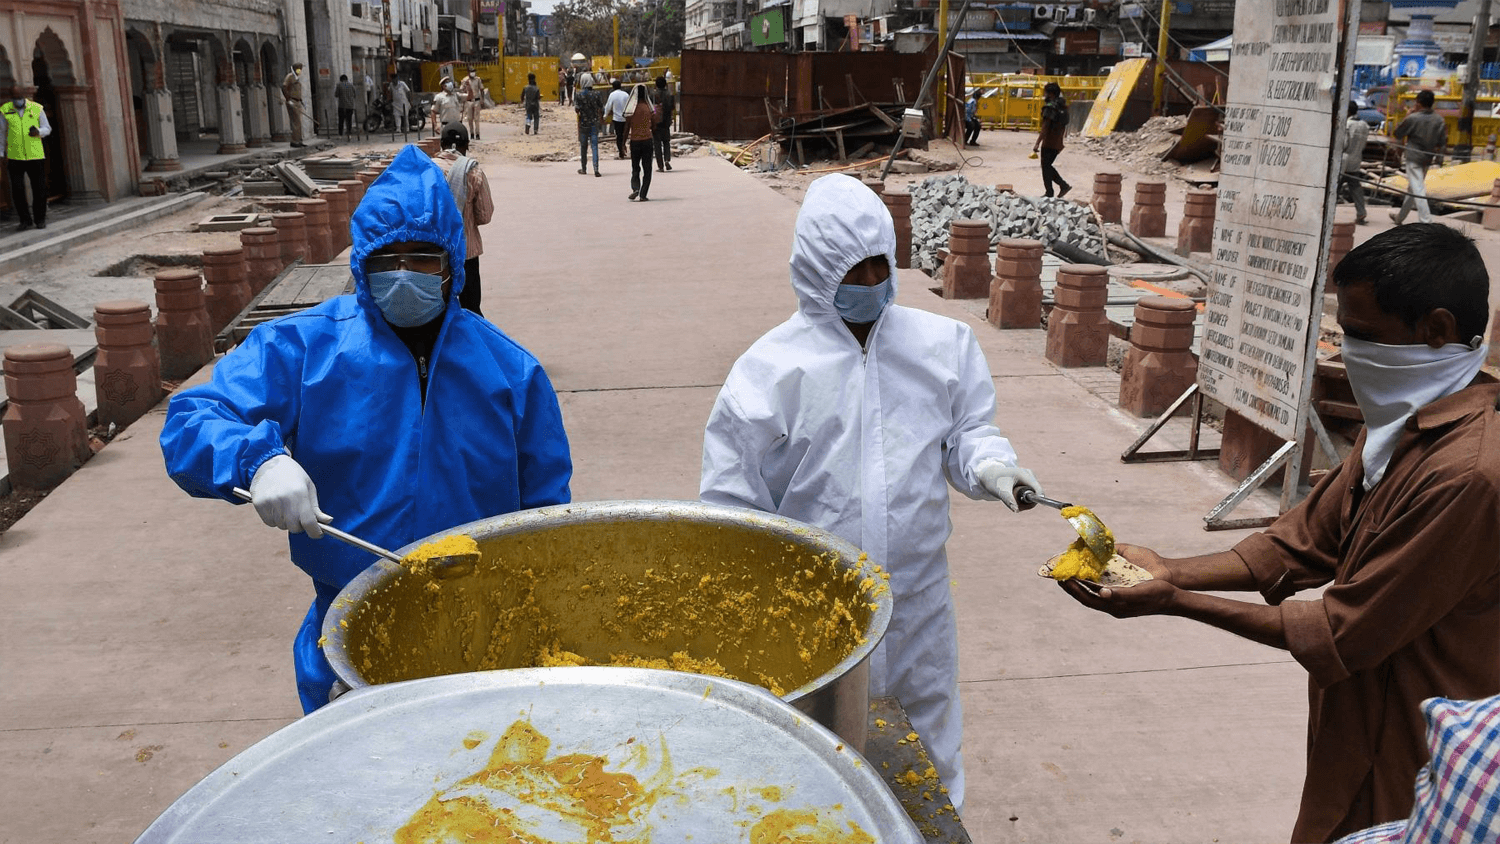 Workers in full PPE gear hand out food in India